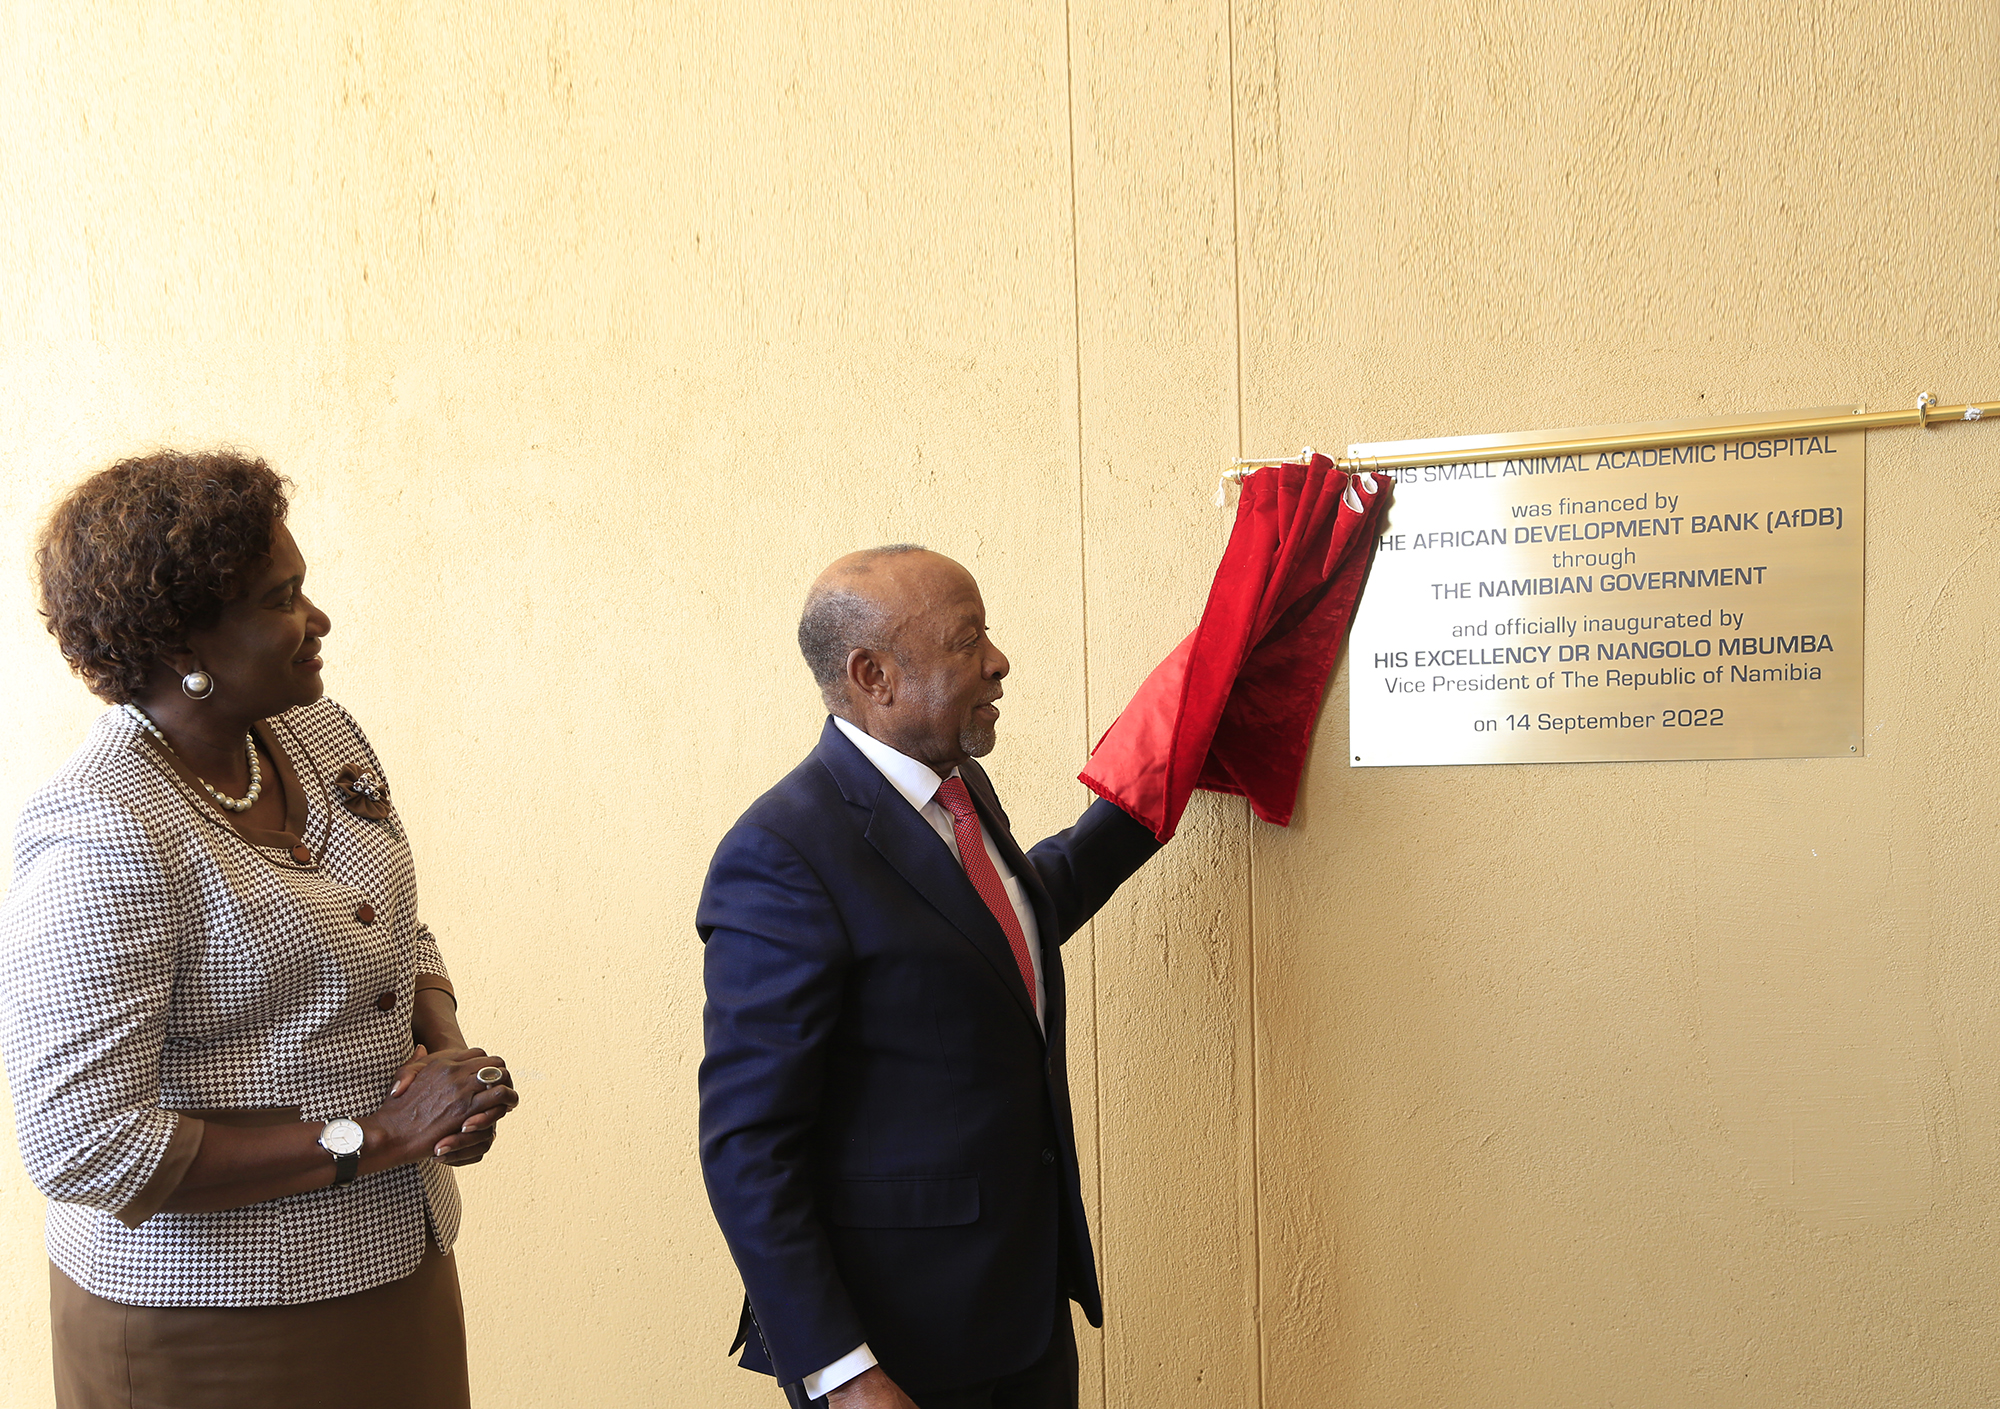 UNAM Chancellor Inaugurates first-ever Veterinary Academic Hospital in Namibia